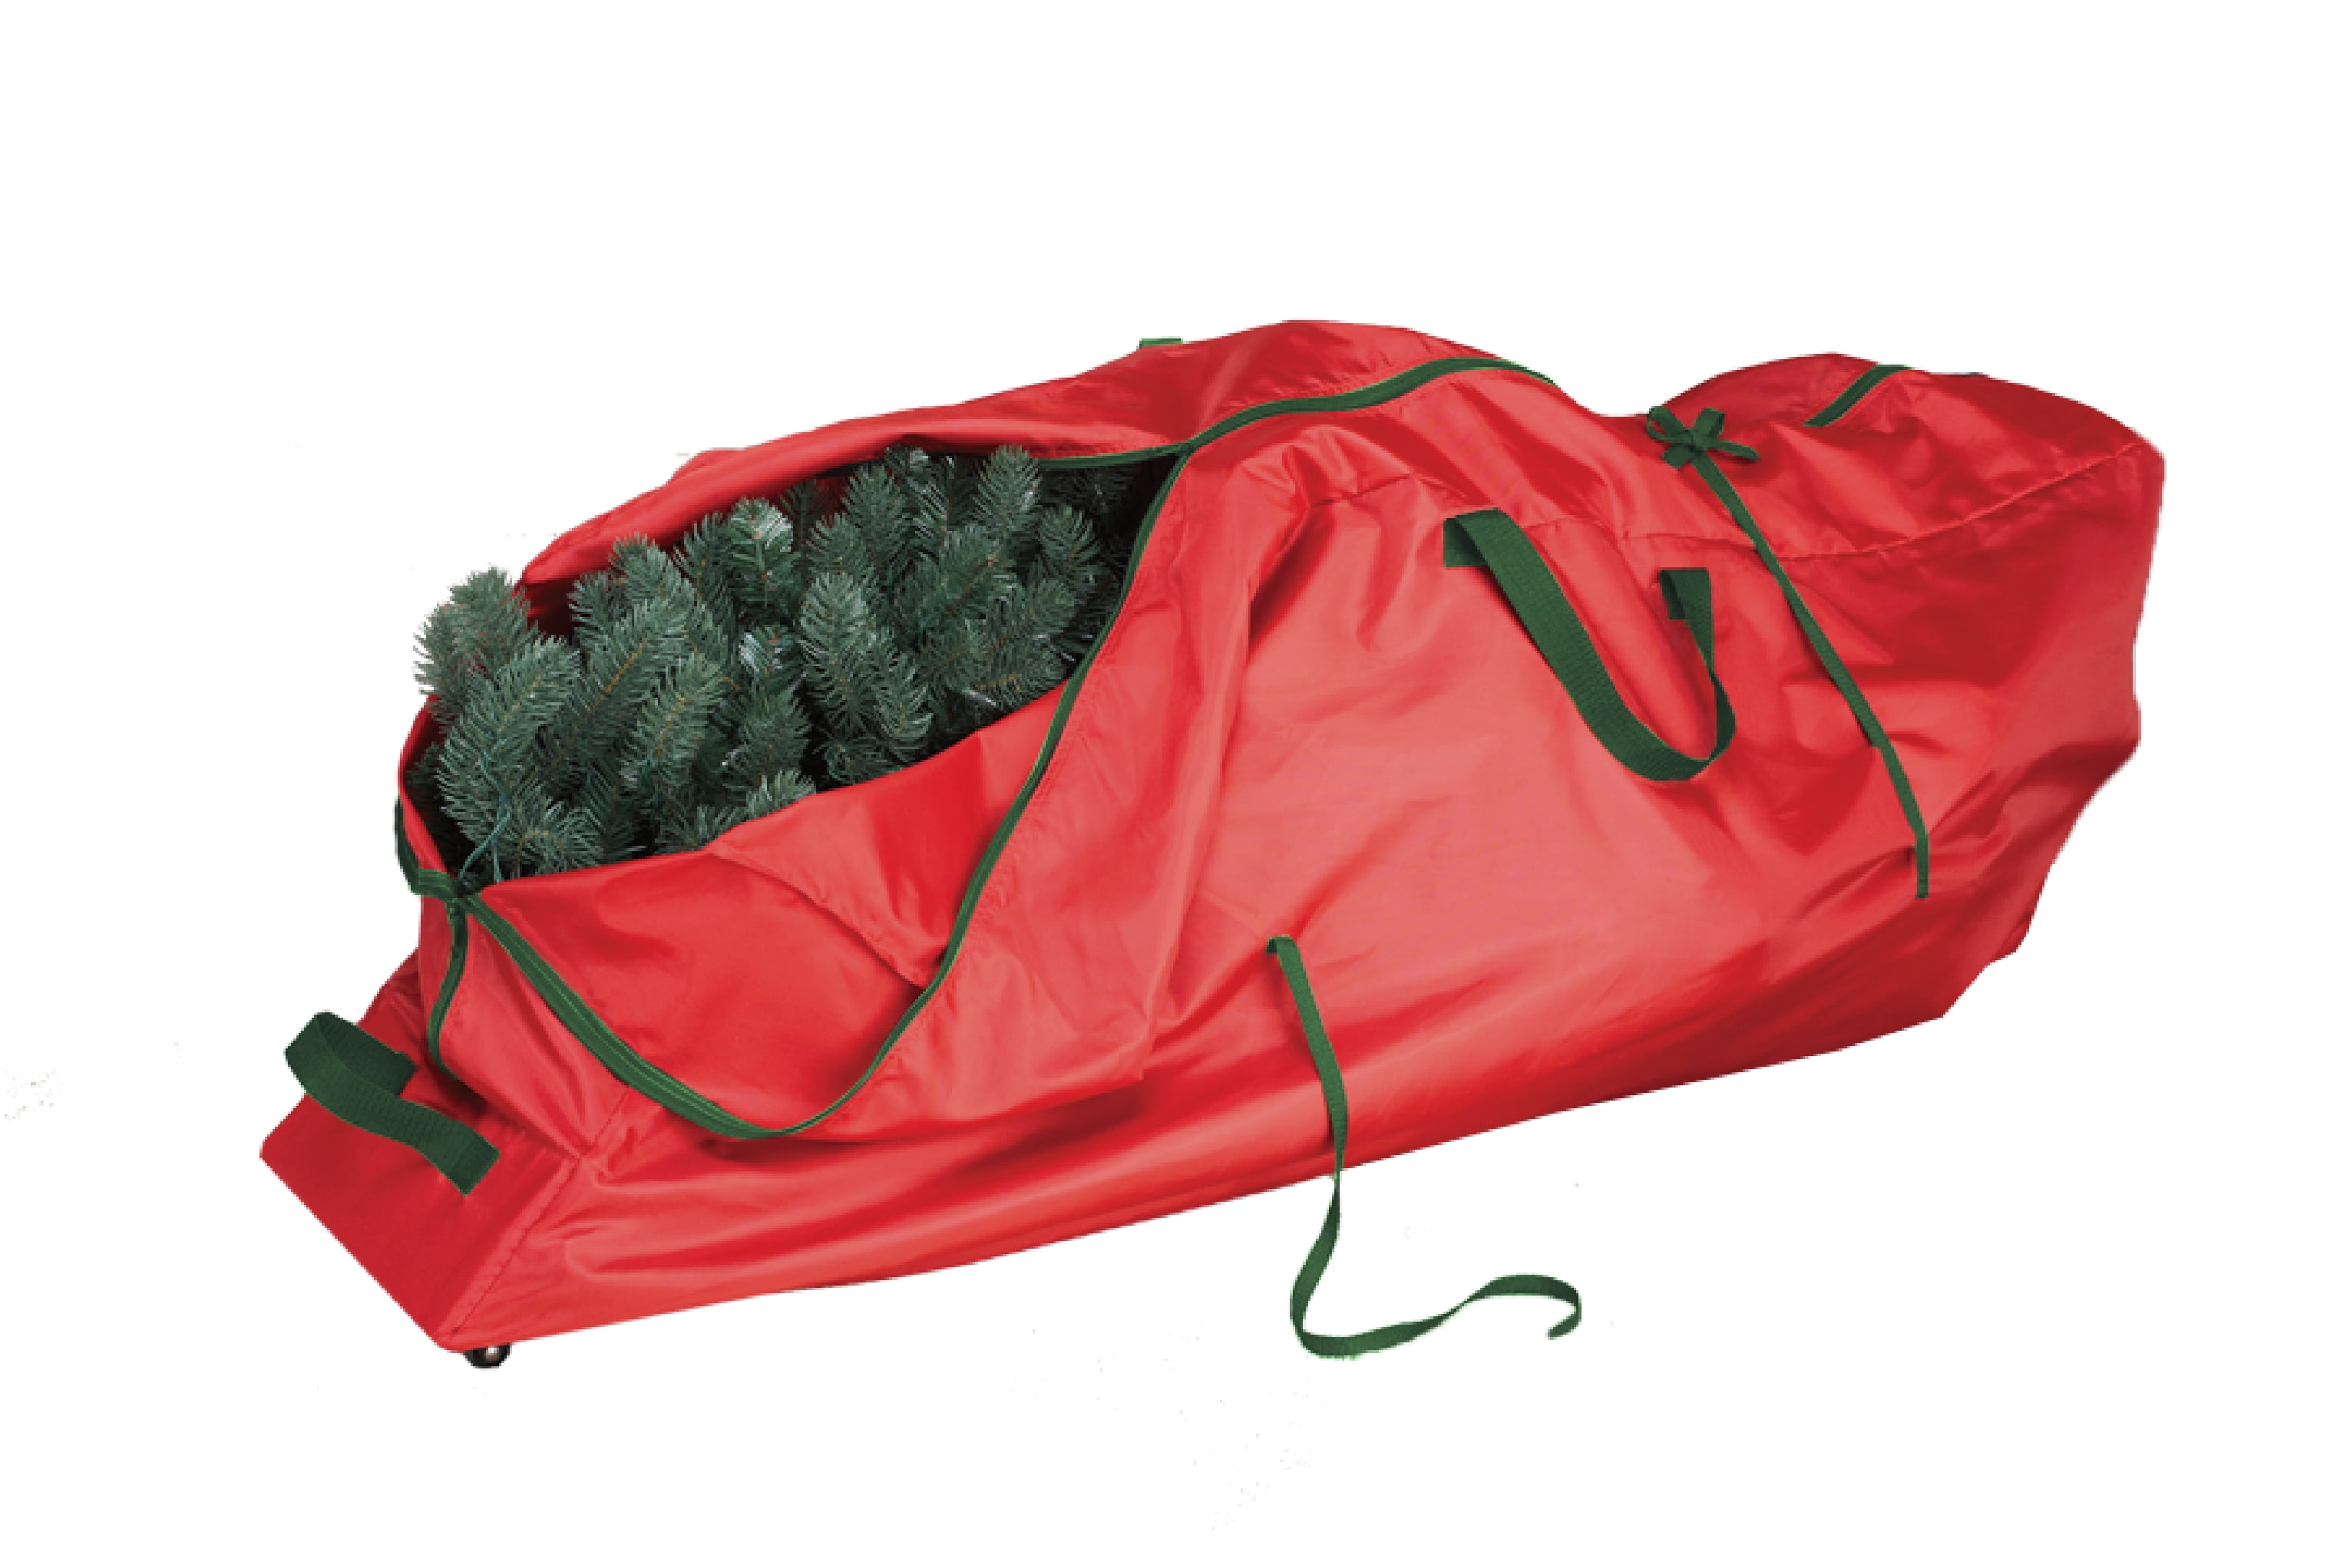 Large Heavy Duty Christmas Tree Storage Bag with Wheels Fits Tree up to 2.7m/9ft 